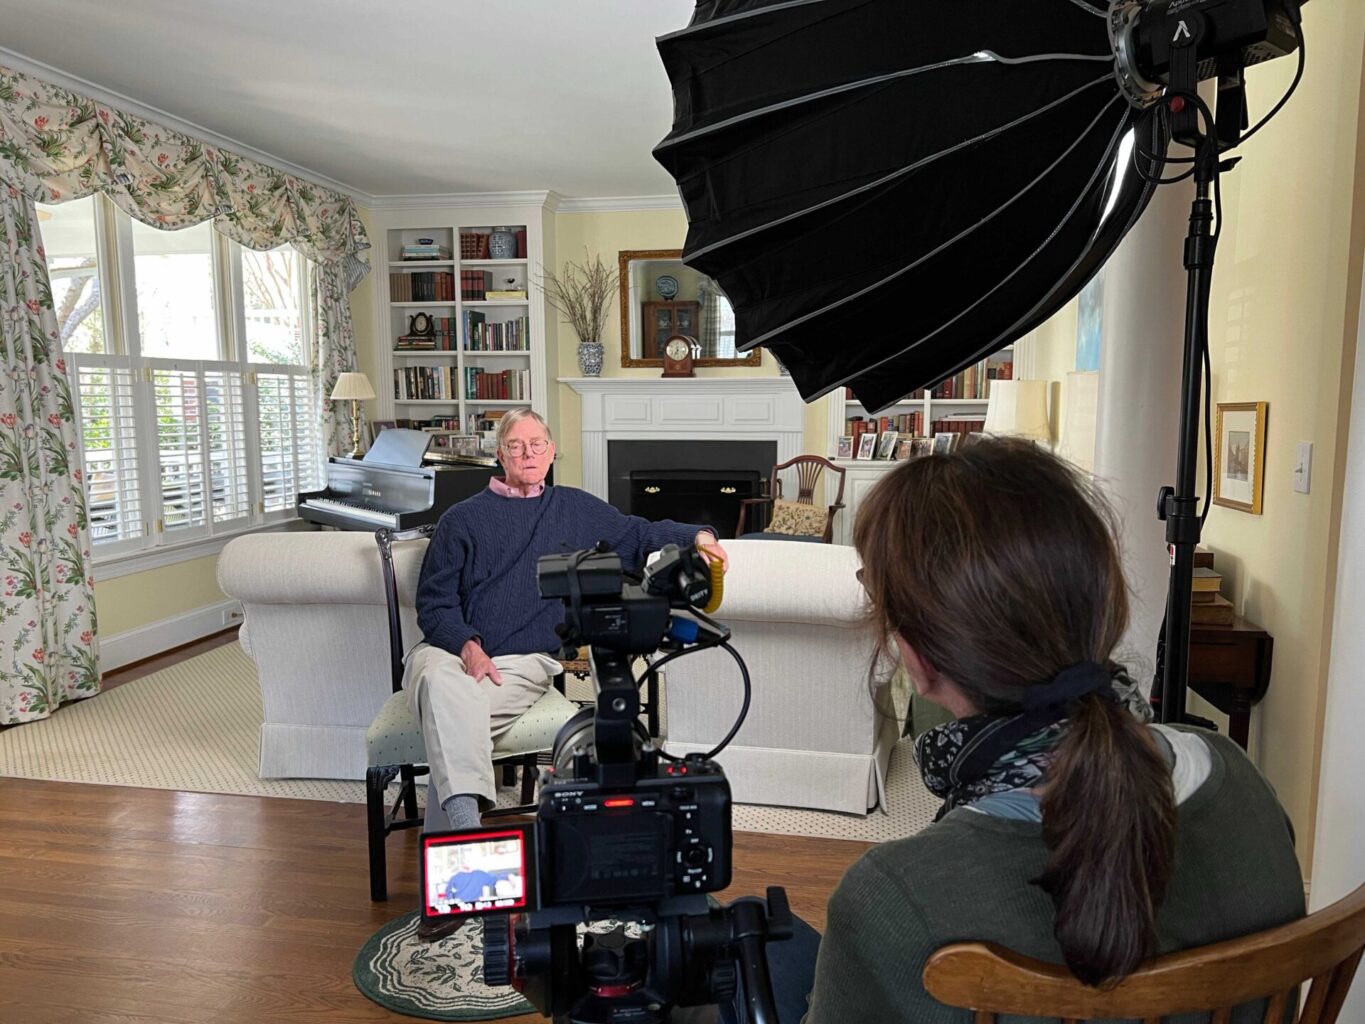 "De was more than willing to stay open and honest in pursuing the truth of his slaveholding roots. There were no rose-colored glasses." Pictured: Louise Whoerle interviews Jock Tonissen in the documentary A BINDING TRUTH. Photo courtesy of Whirlygig Productions.